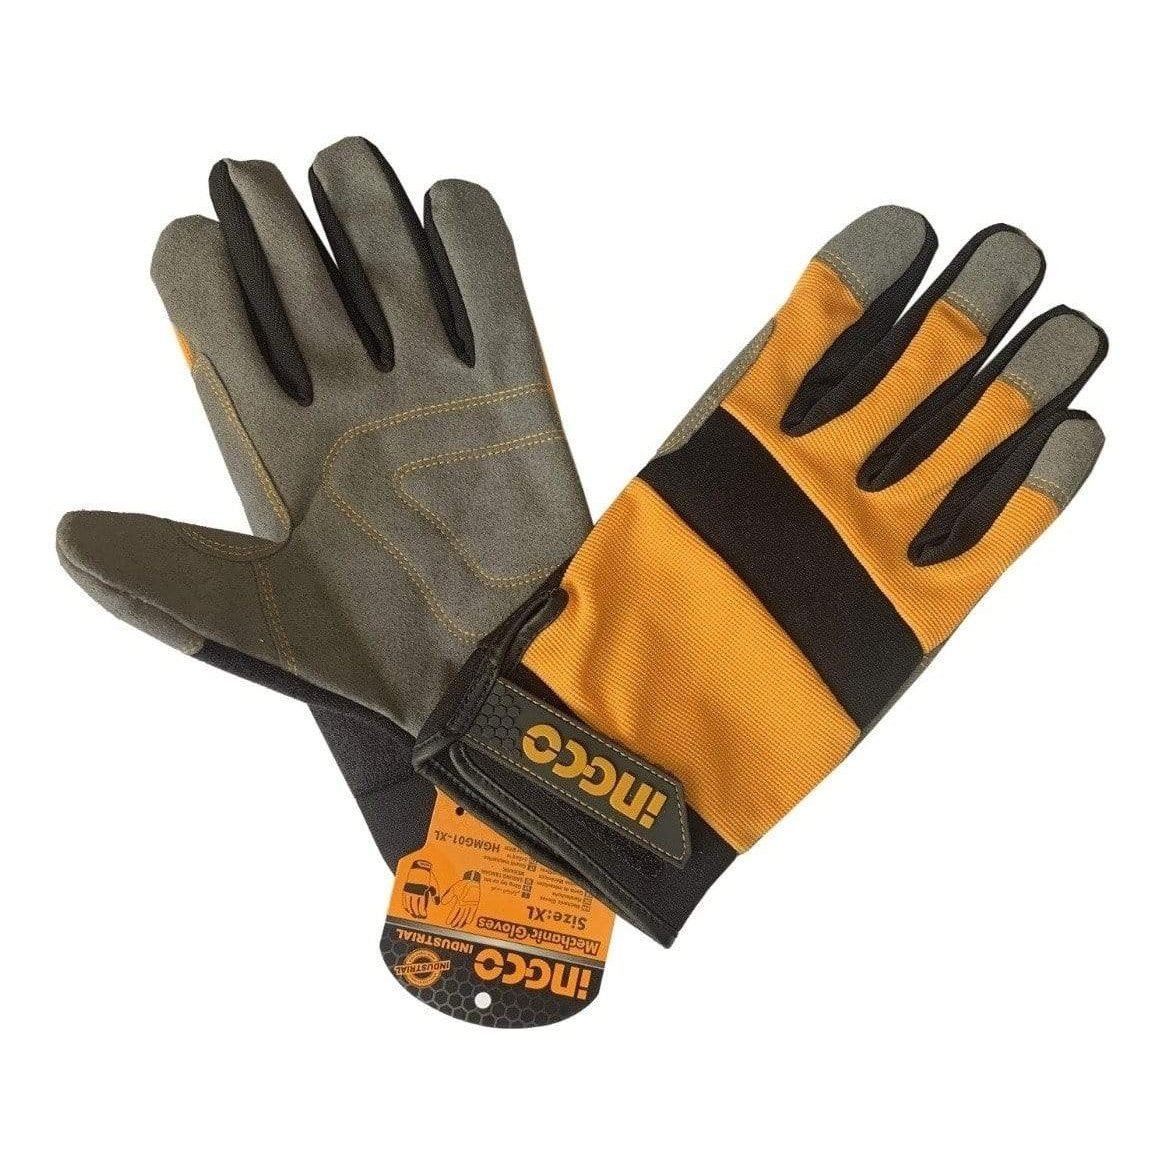 Ingco Mechanic Gloves - HGMG01-XL | Supply Master | Accra, Ghana Tools Building Steel Engineering Hardware tool